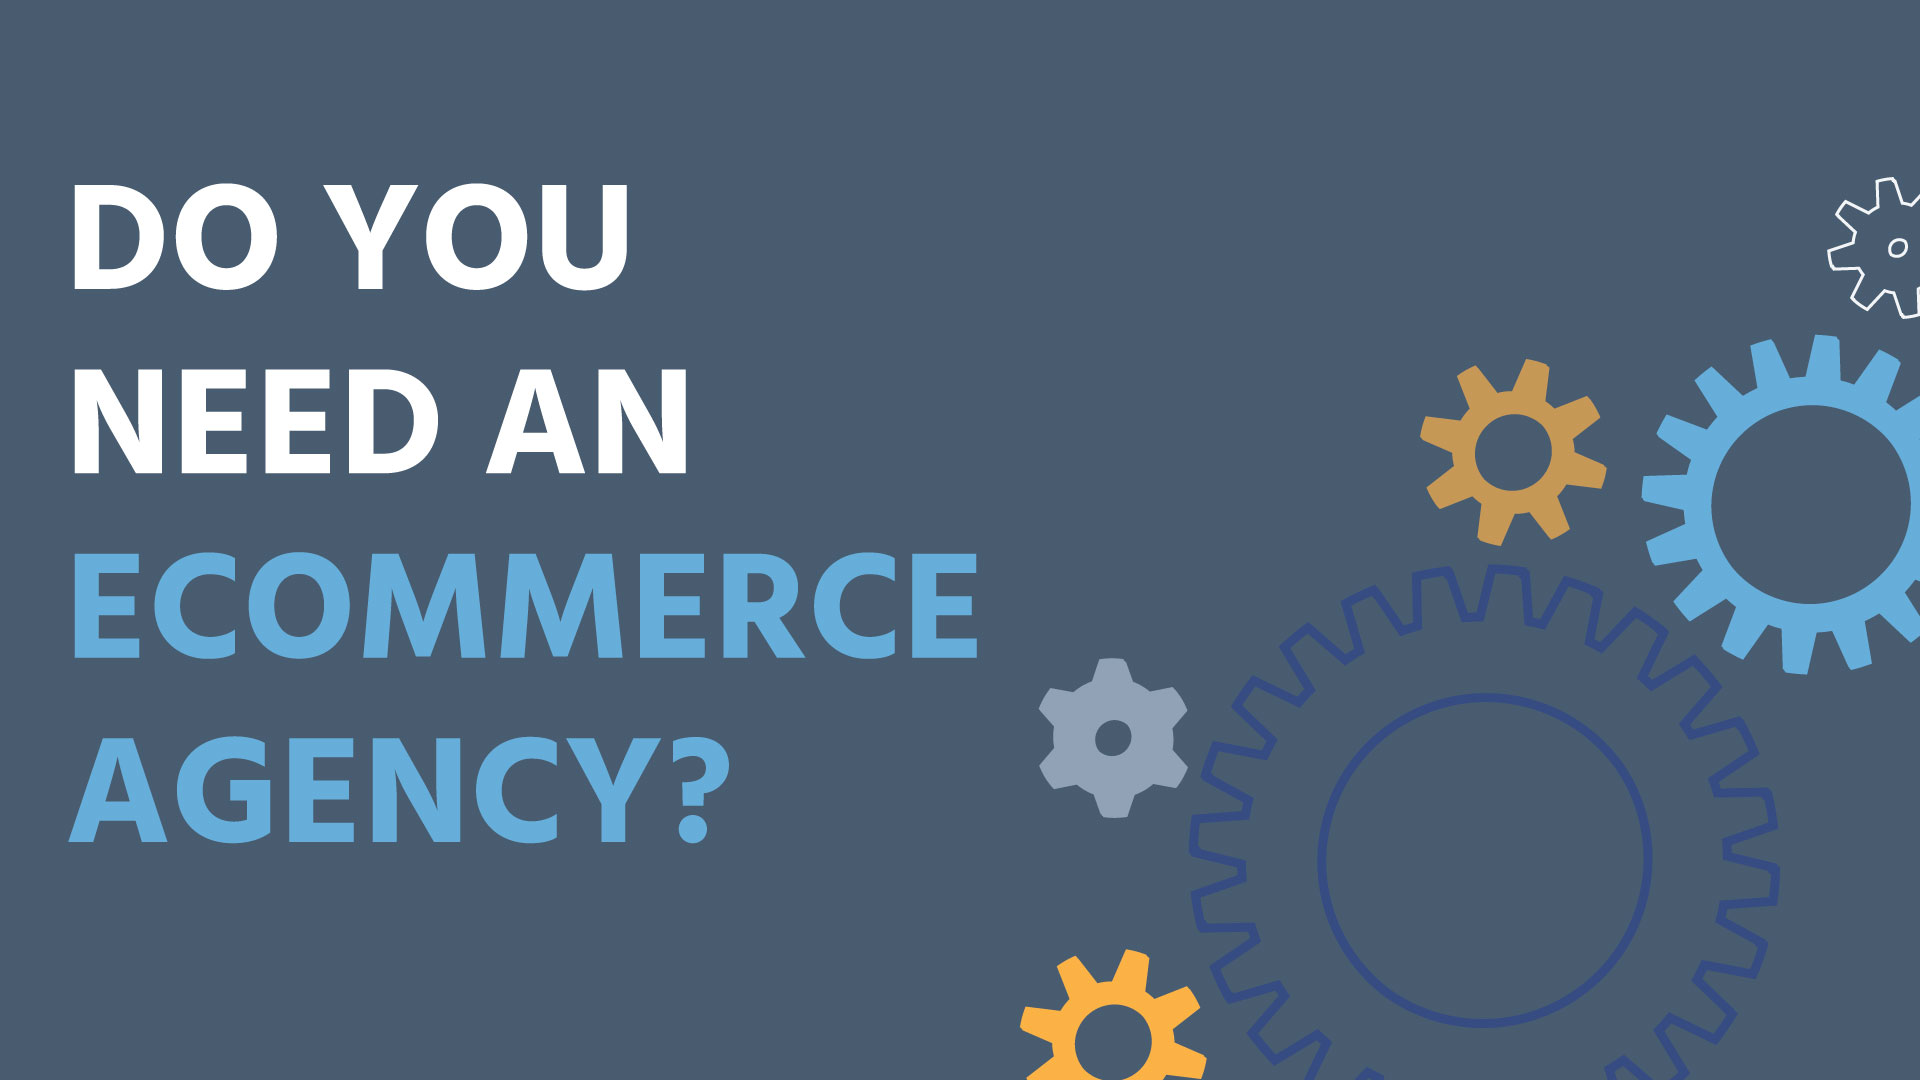 Do you need an eCommerce Agency?